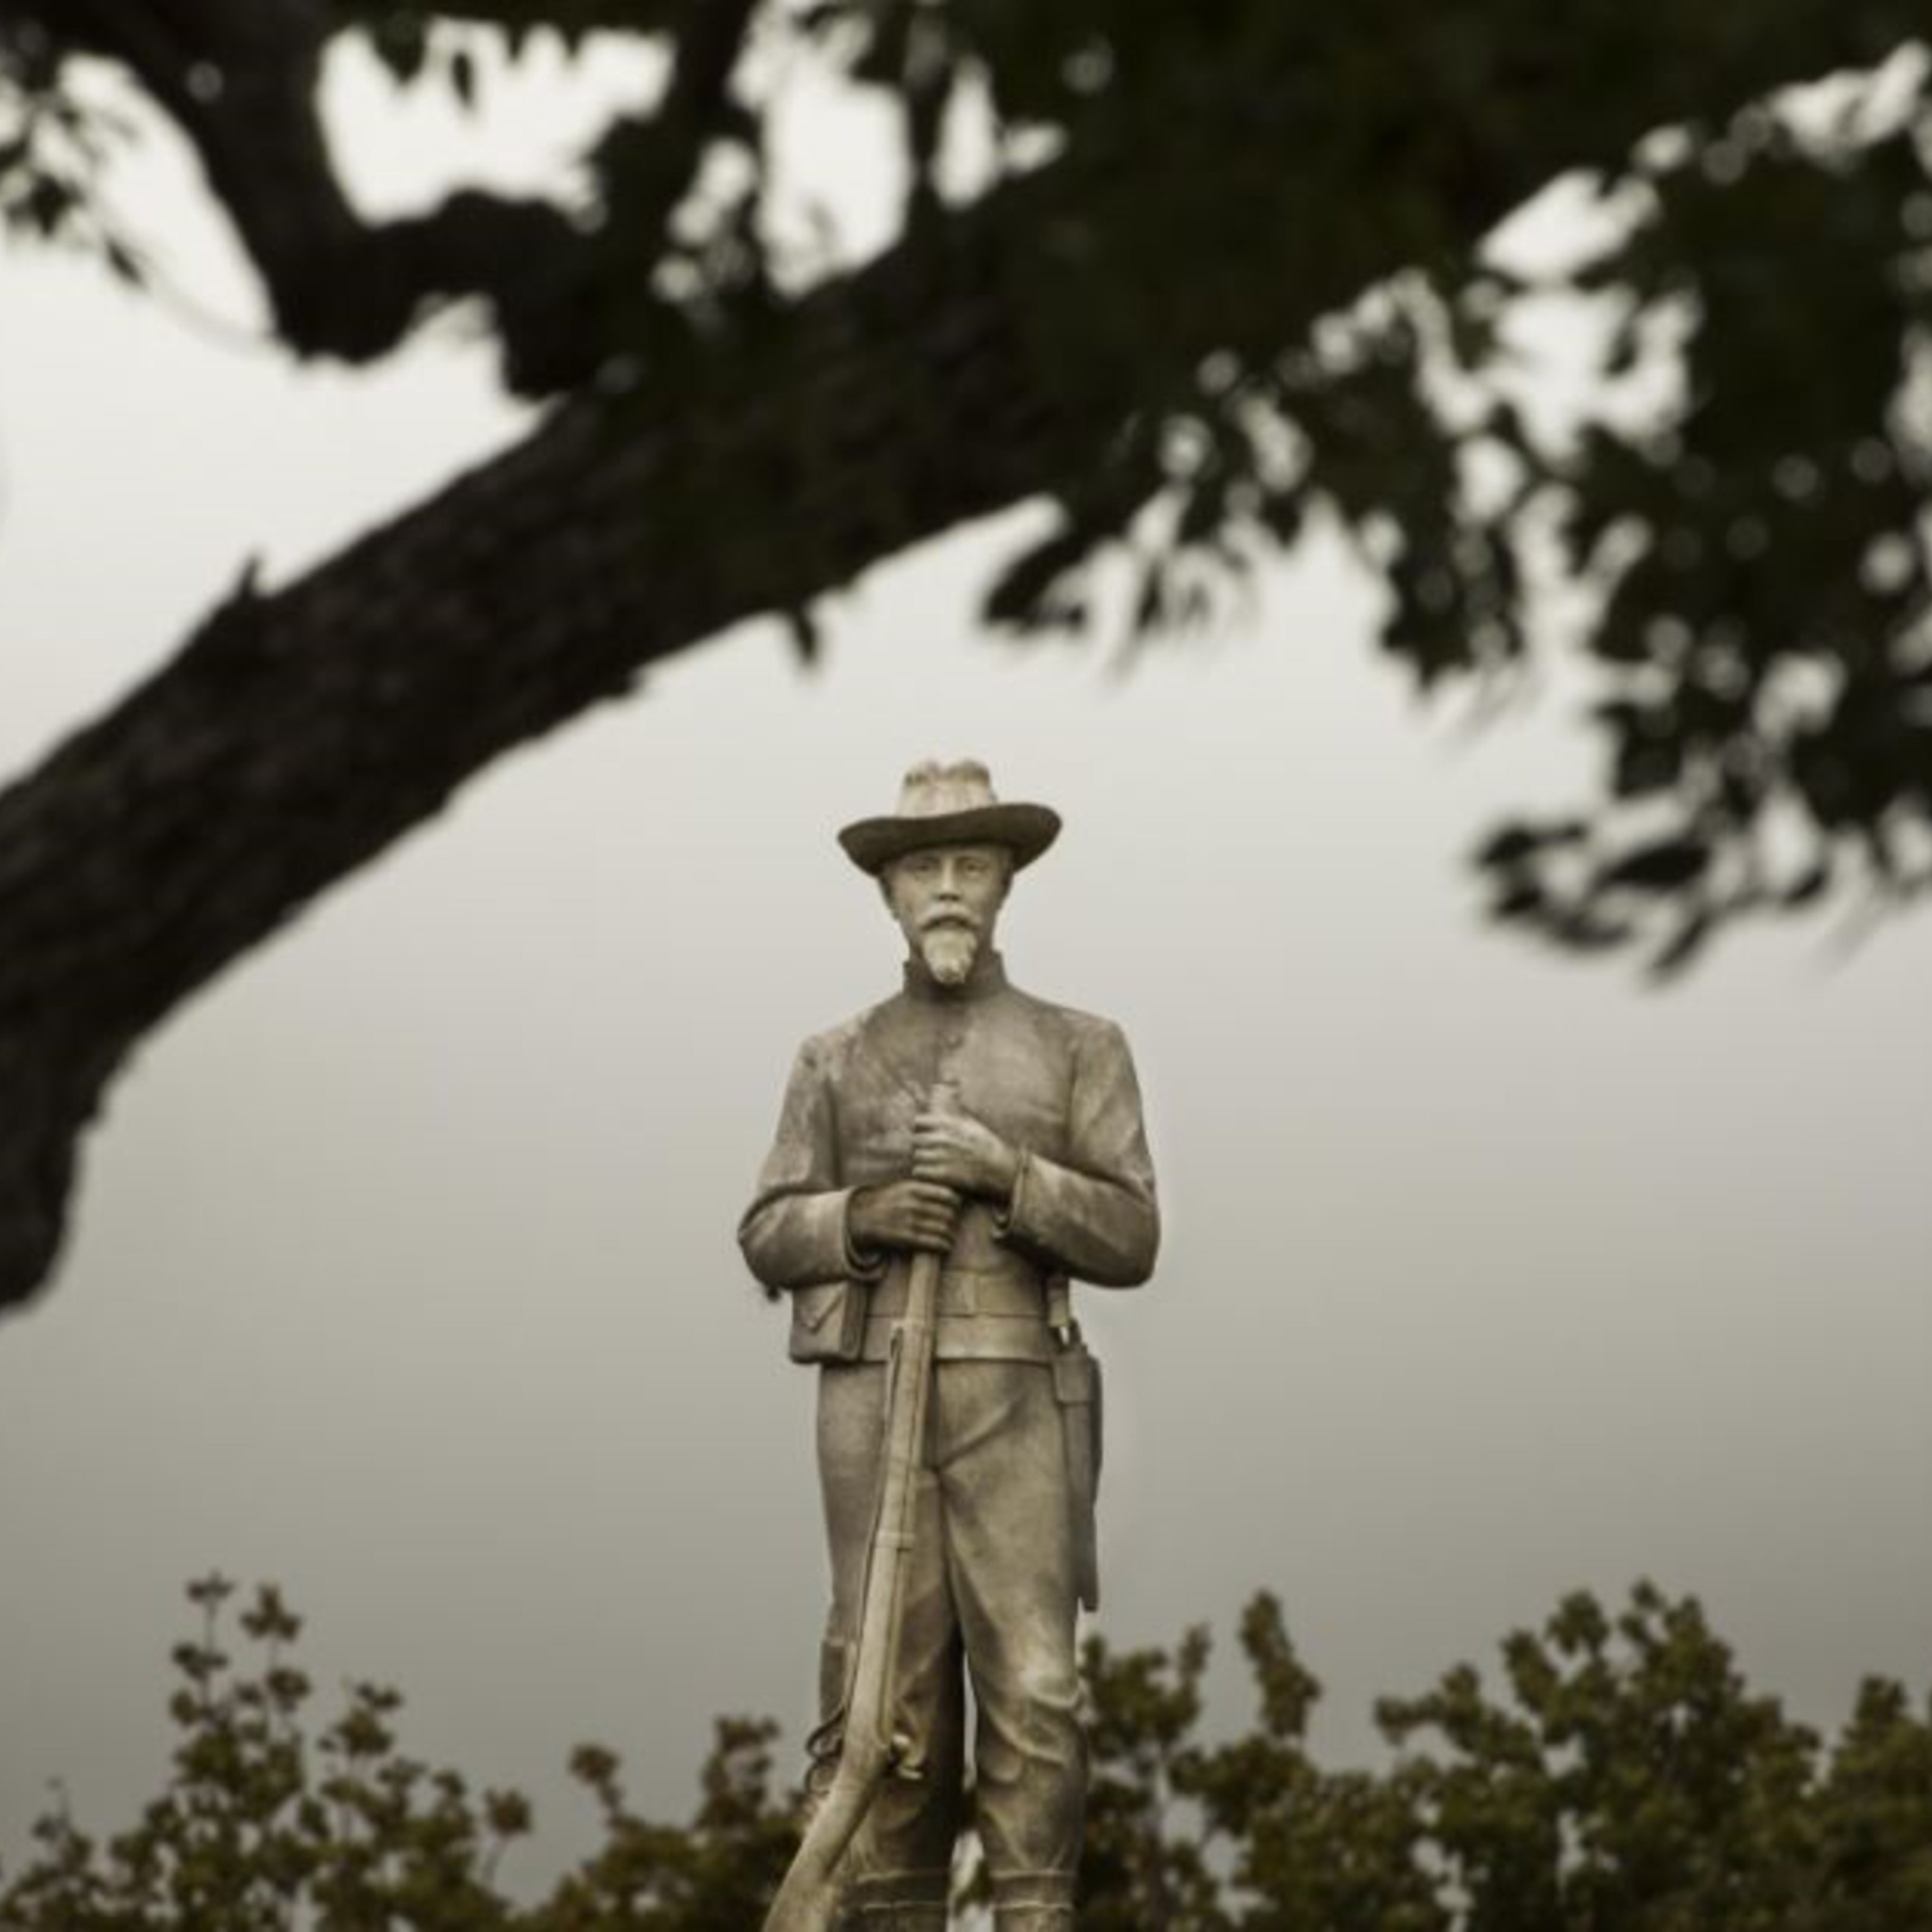 Lakeland City Commission agrees not to move Confederate monument in Munn Park